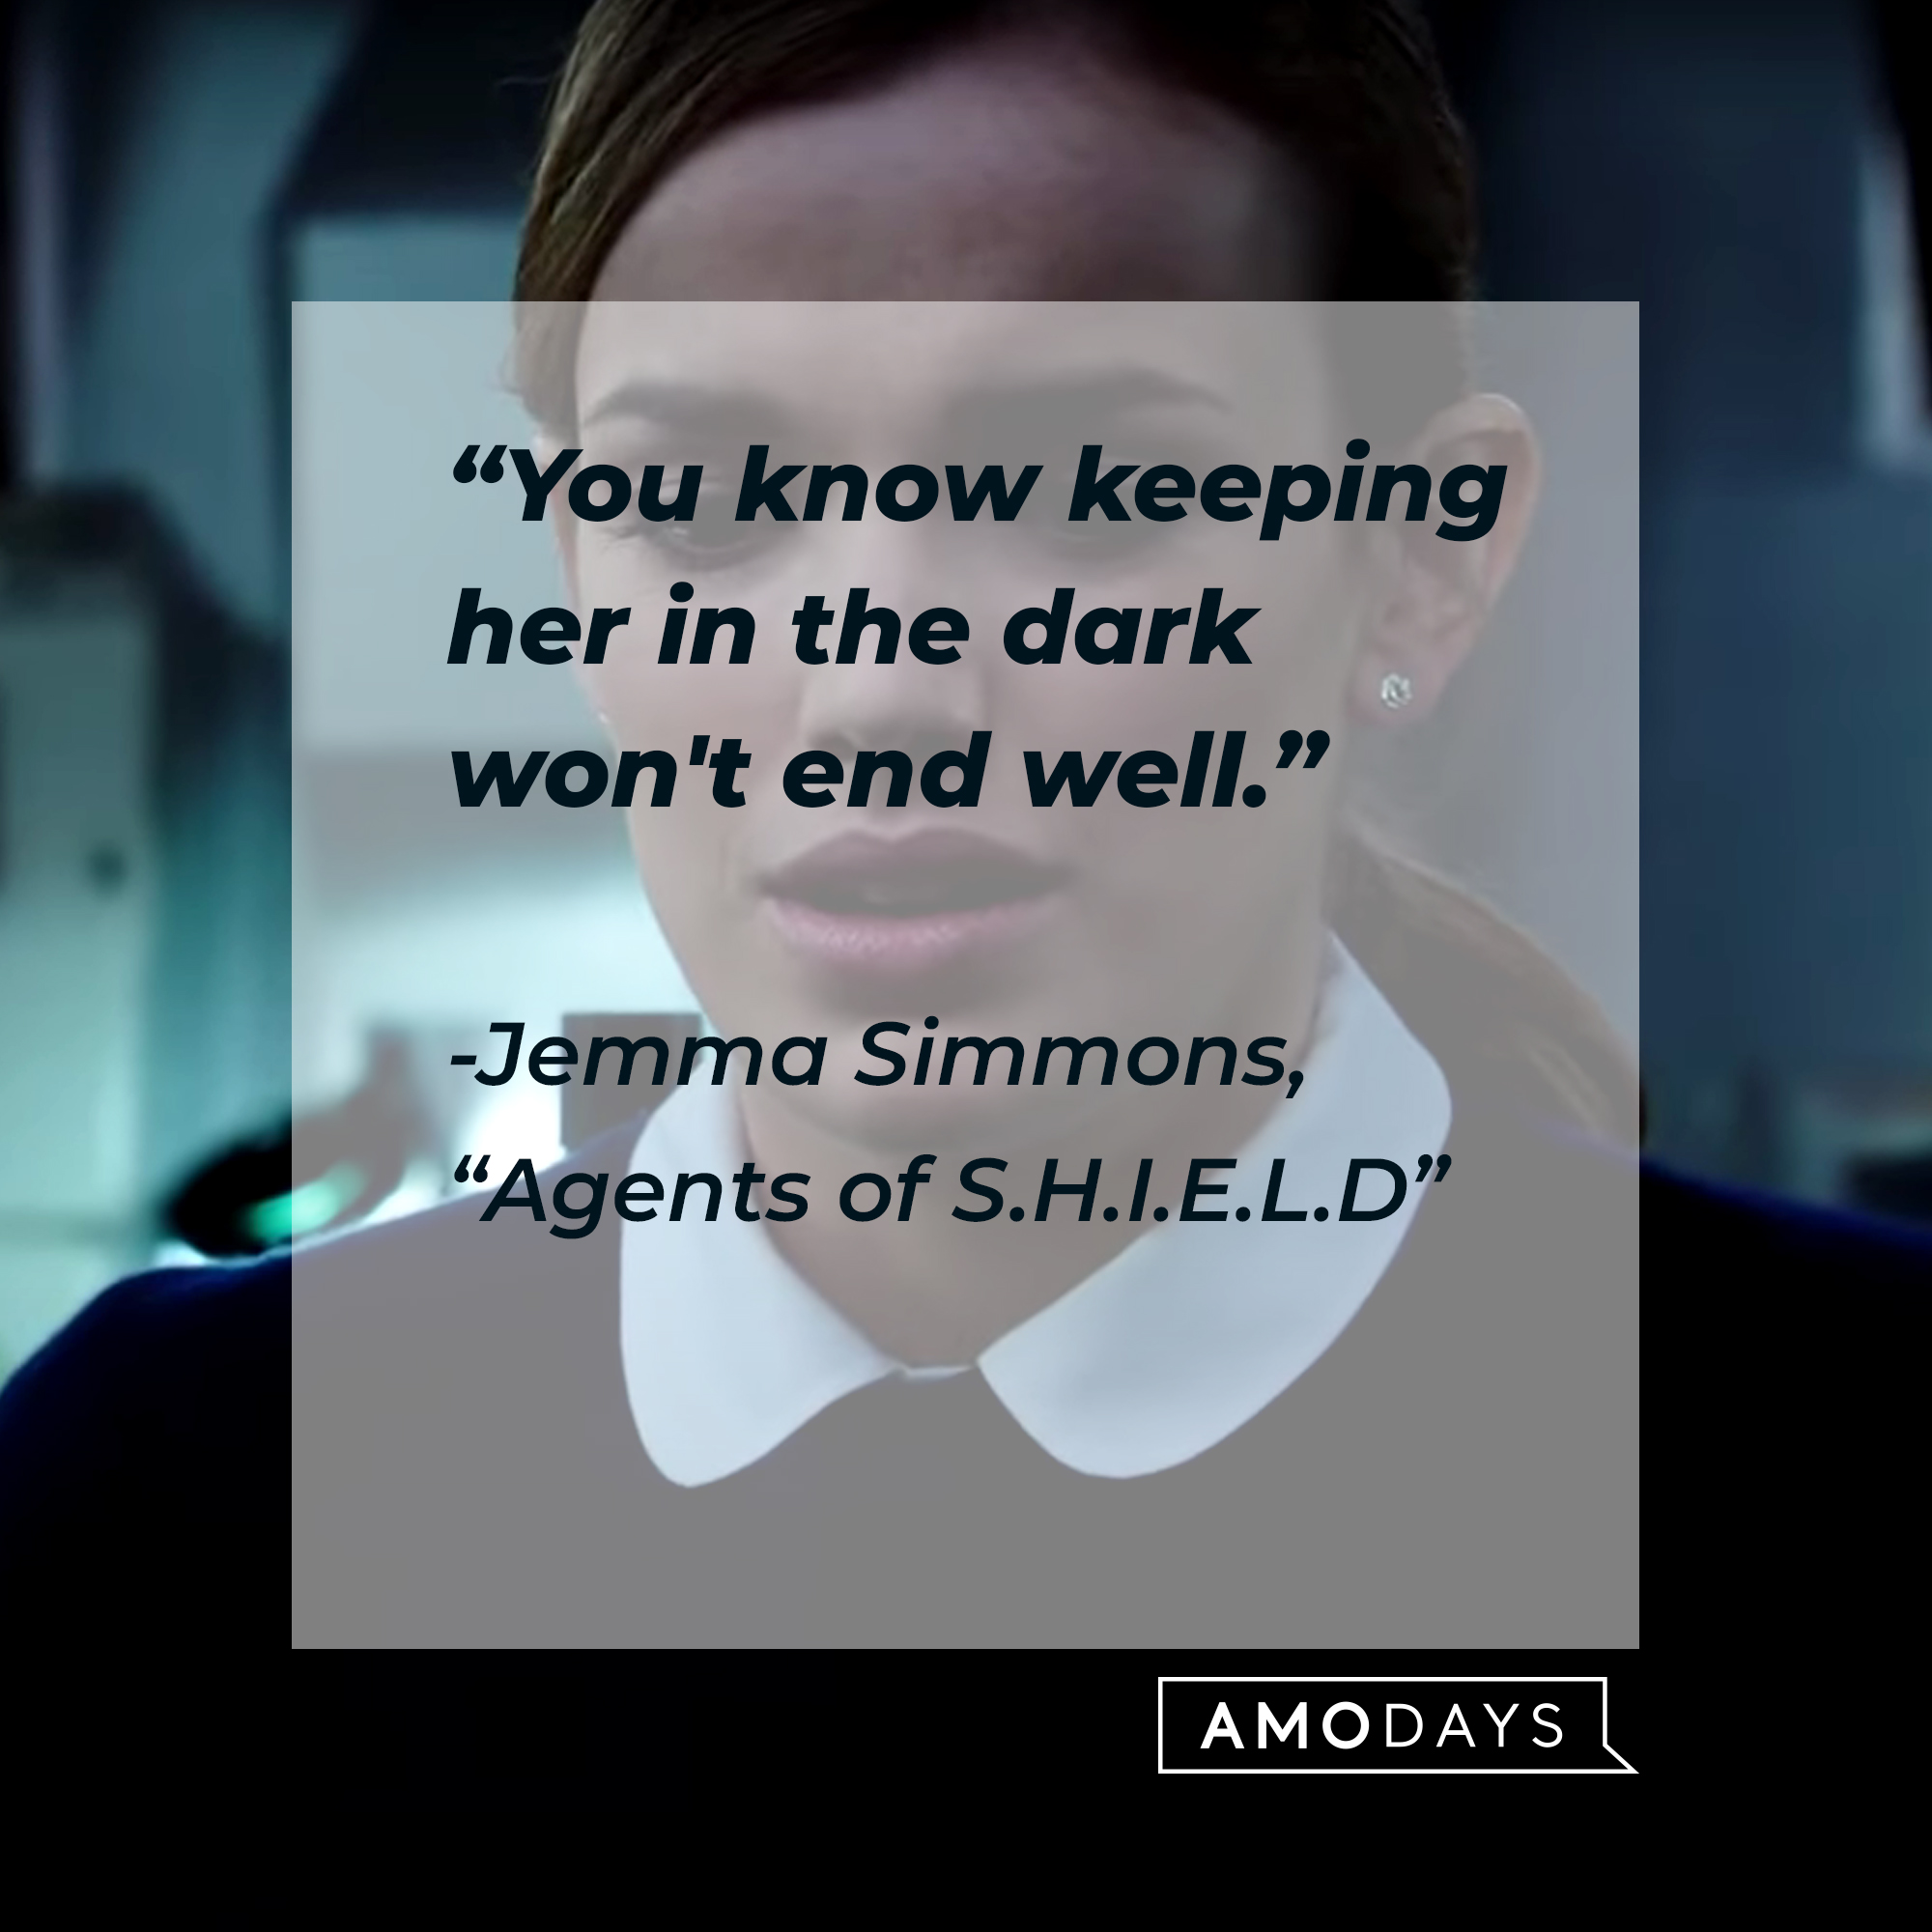 Jemma Simmons with her quote from "Agents of S.H.I.E.L.D.:" “You know keeping her in the dark won't end well.” | Source: Facebook.com/AgentsofShield